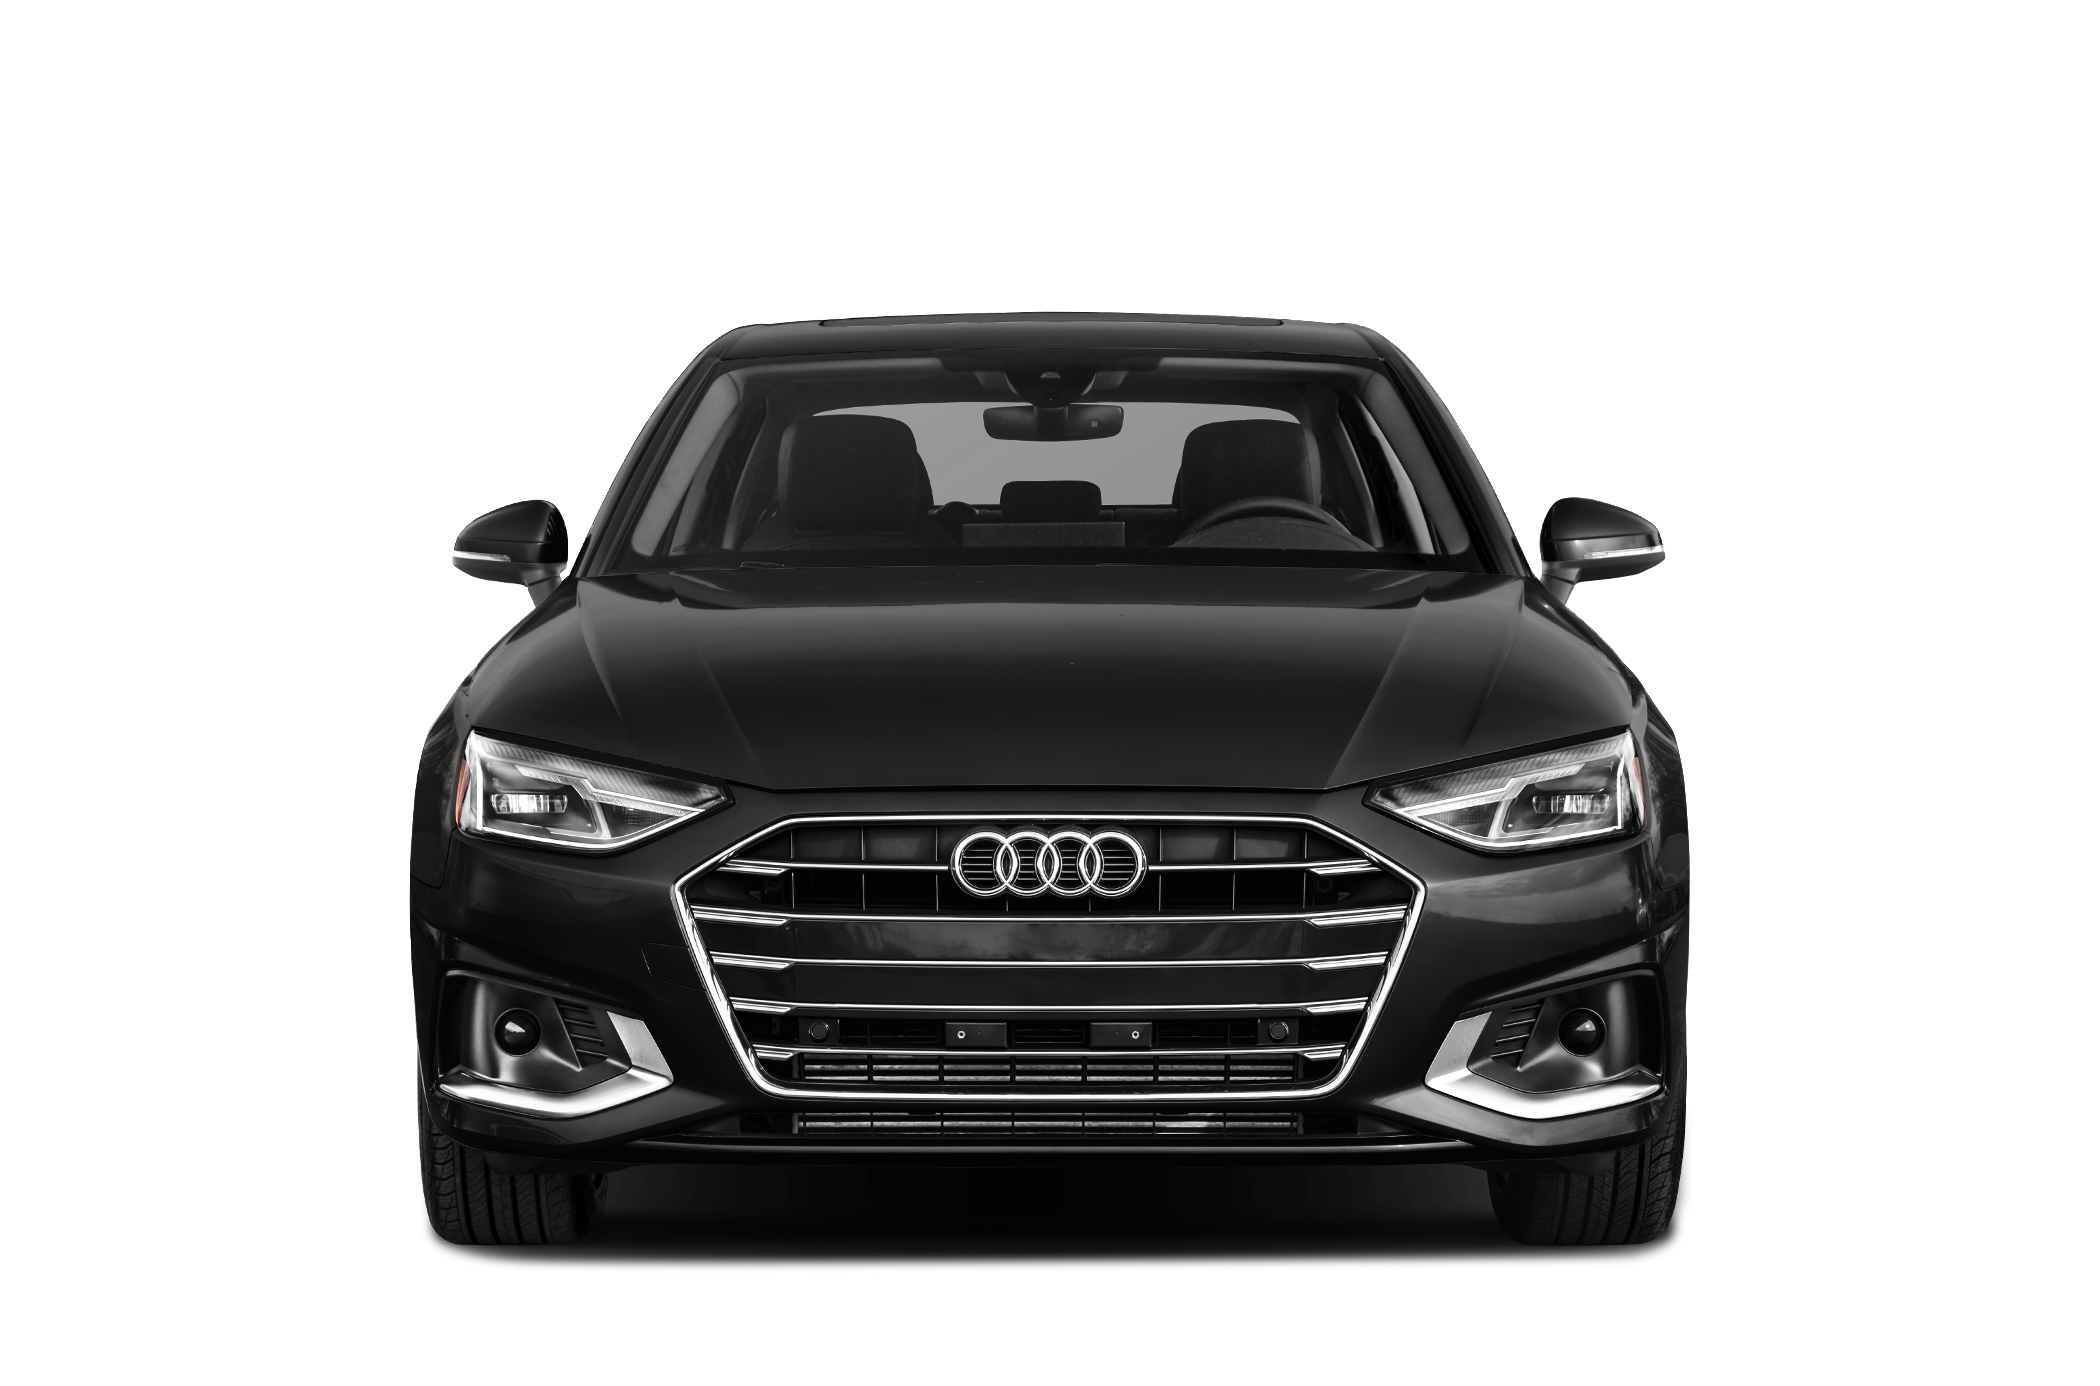 The Audi A4: History, Generations, Specifications